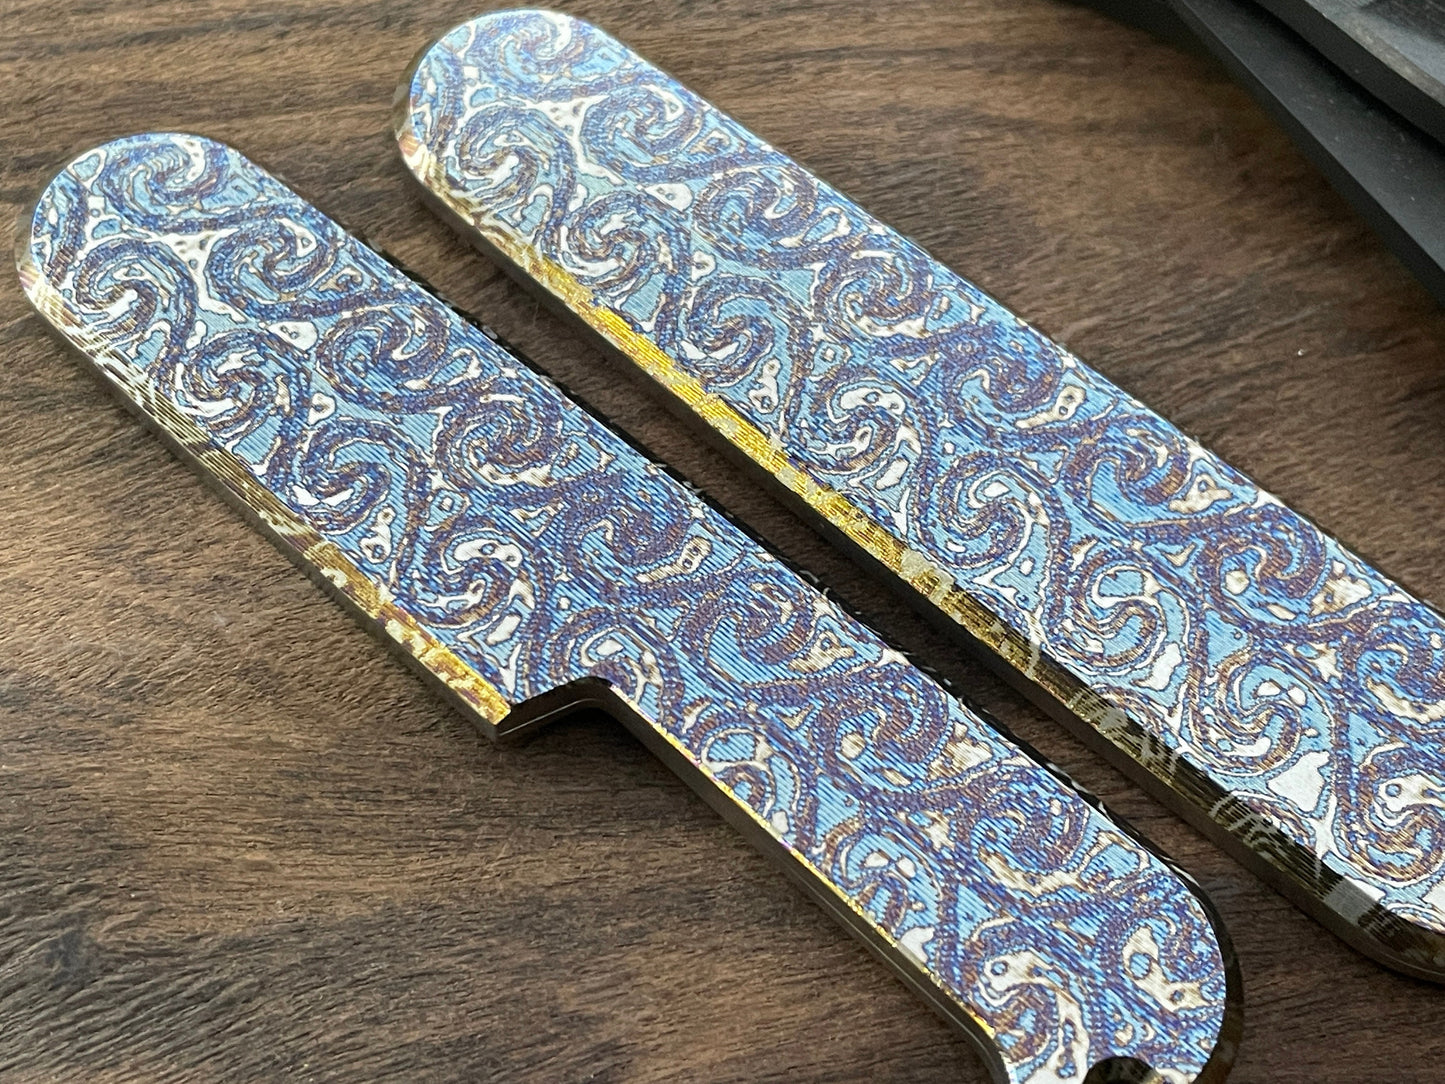 DragonFire engraved 91mm Titanium Scales for Swiss Army SAK